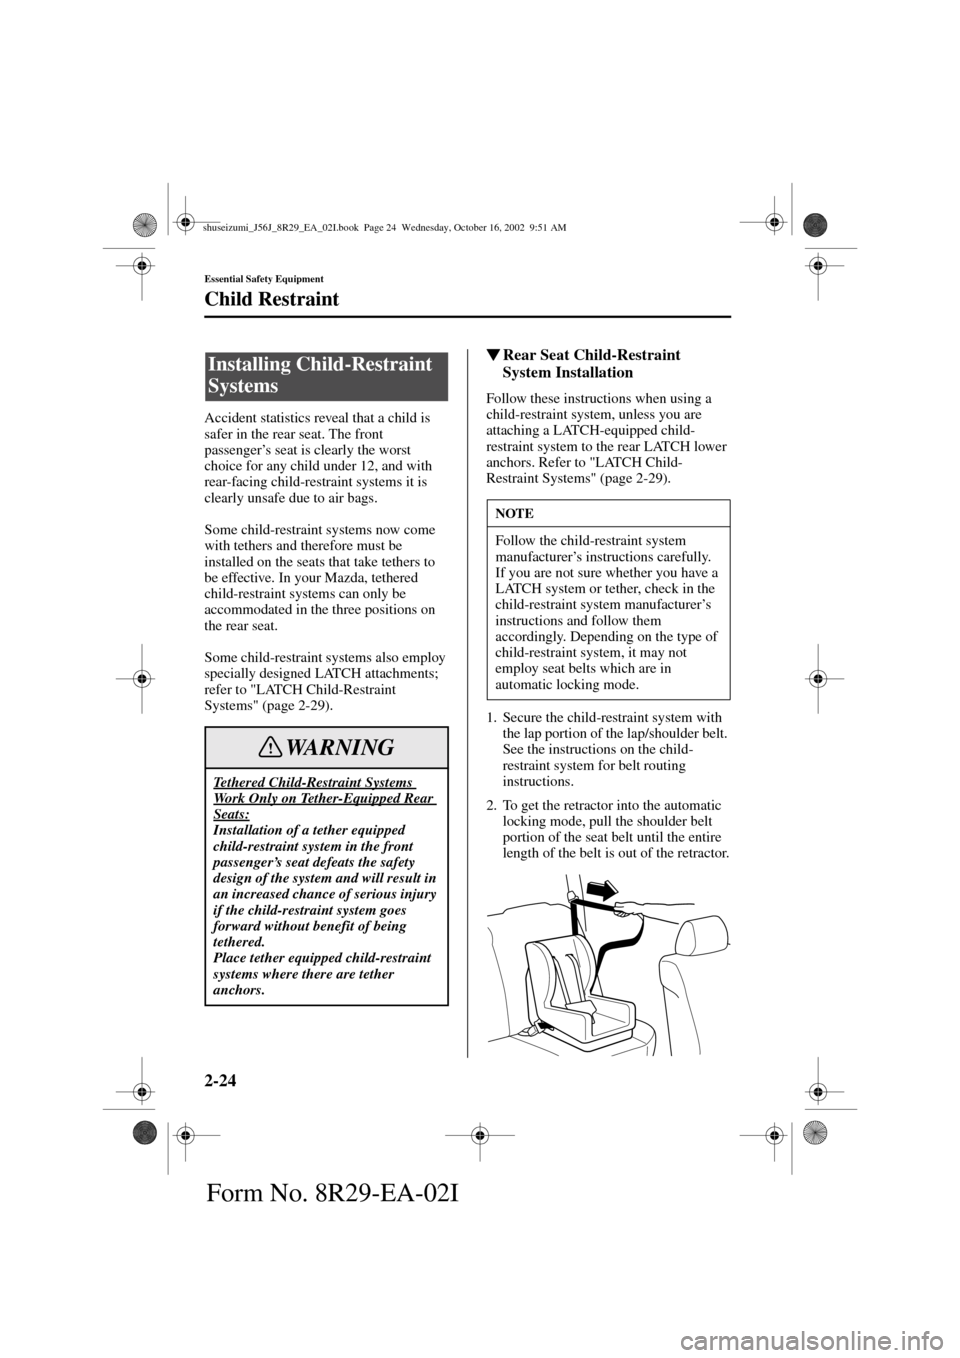 MAZDA MODEL 6 2003  Owners Manual (in English) 2-24
Essential Safety Equipment
Child Restraint
Form No. 8R29-EA-02I
Accident statistics reveal that a child is 
safer in the rear seat. The front 
passenger’s seat is clearly the worst 
choice for 